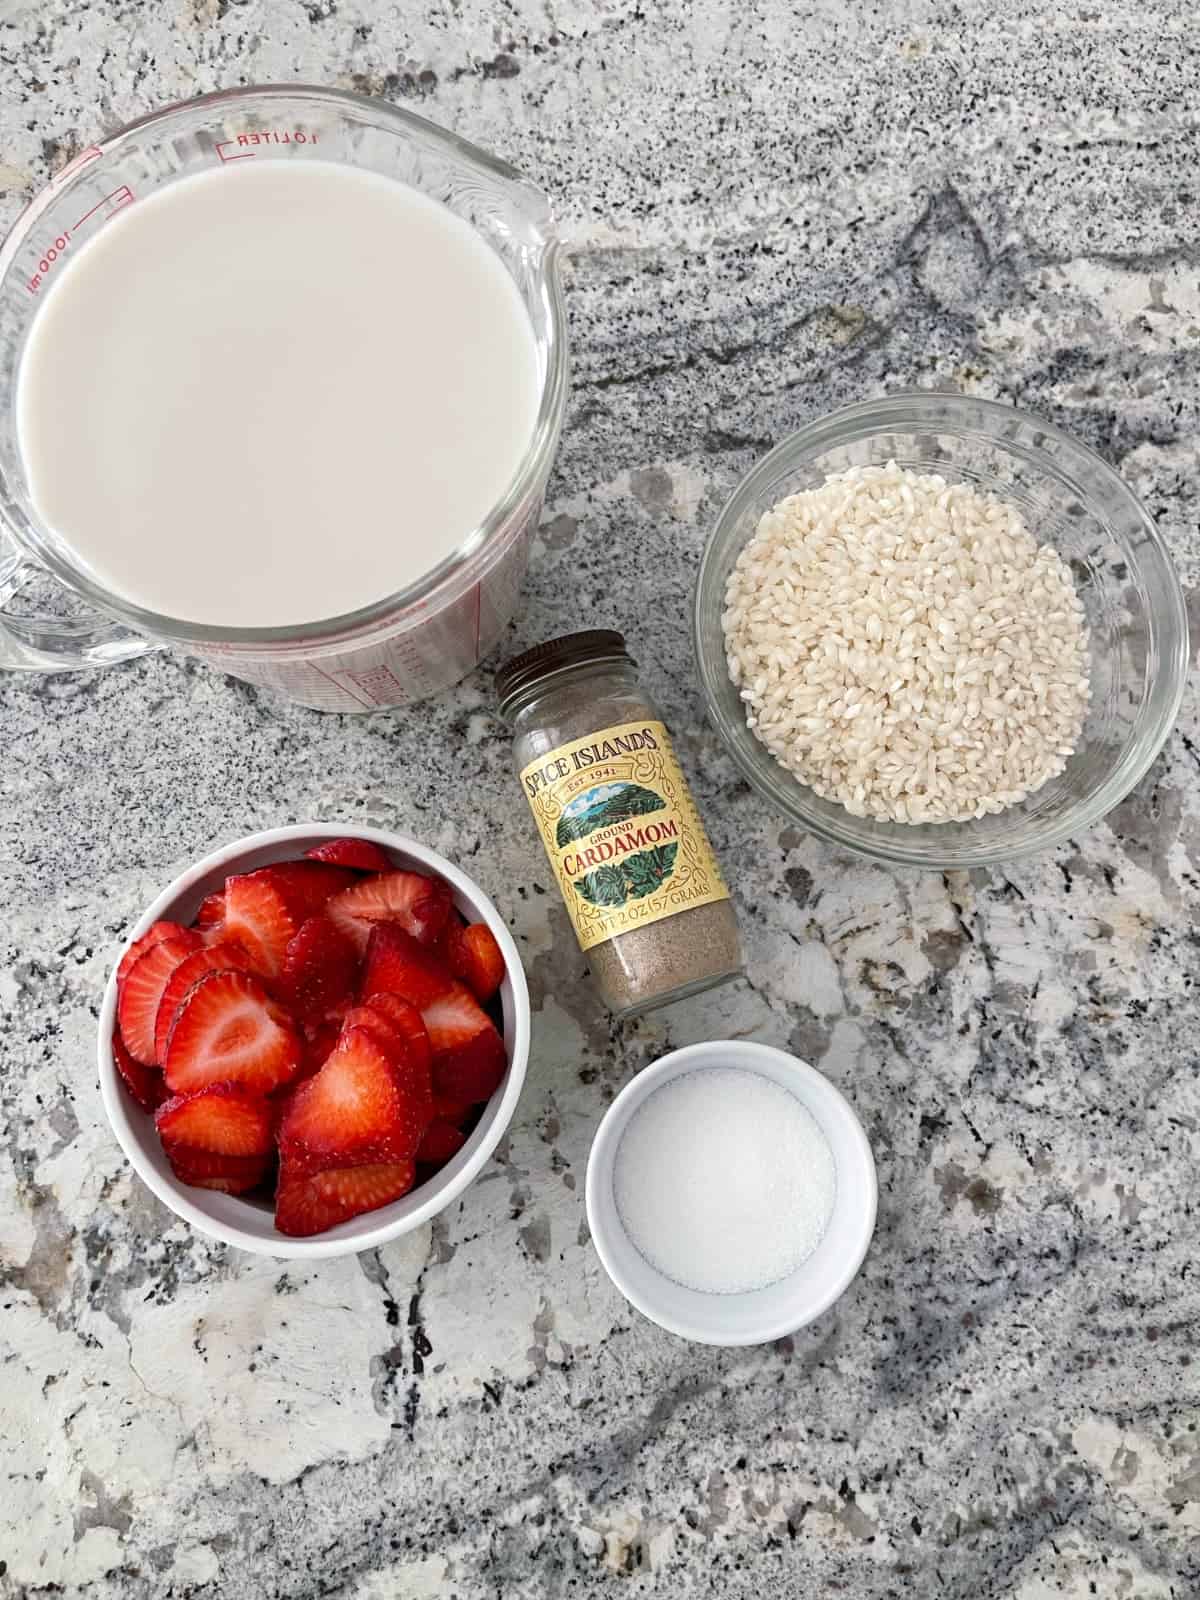 Ingredients including milk, sliced strawberries, Arborio rice, Truvia Baking Blend and ground cardamon.